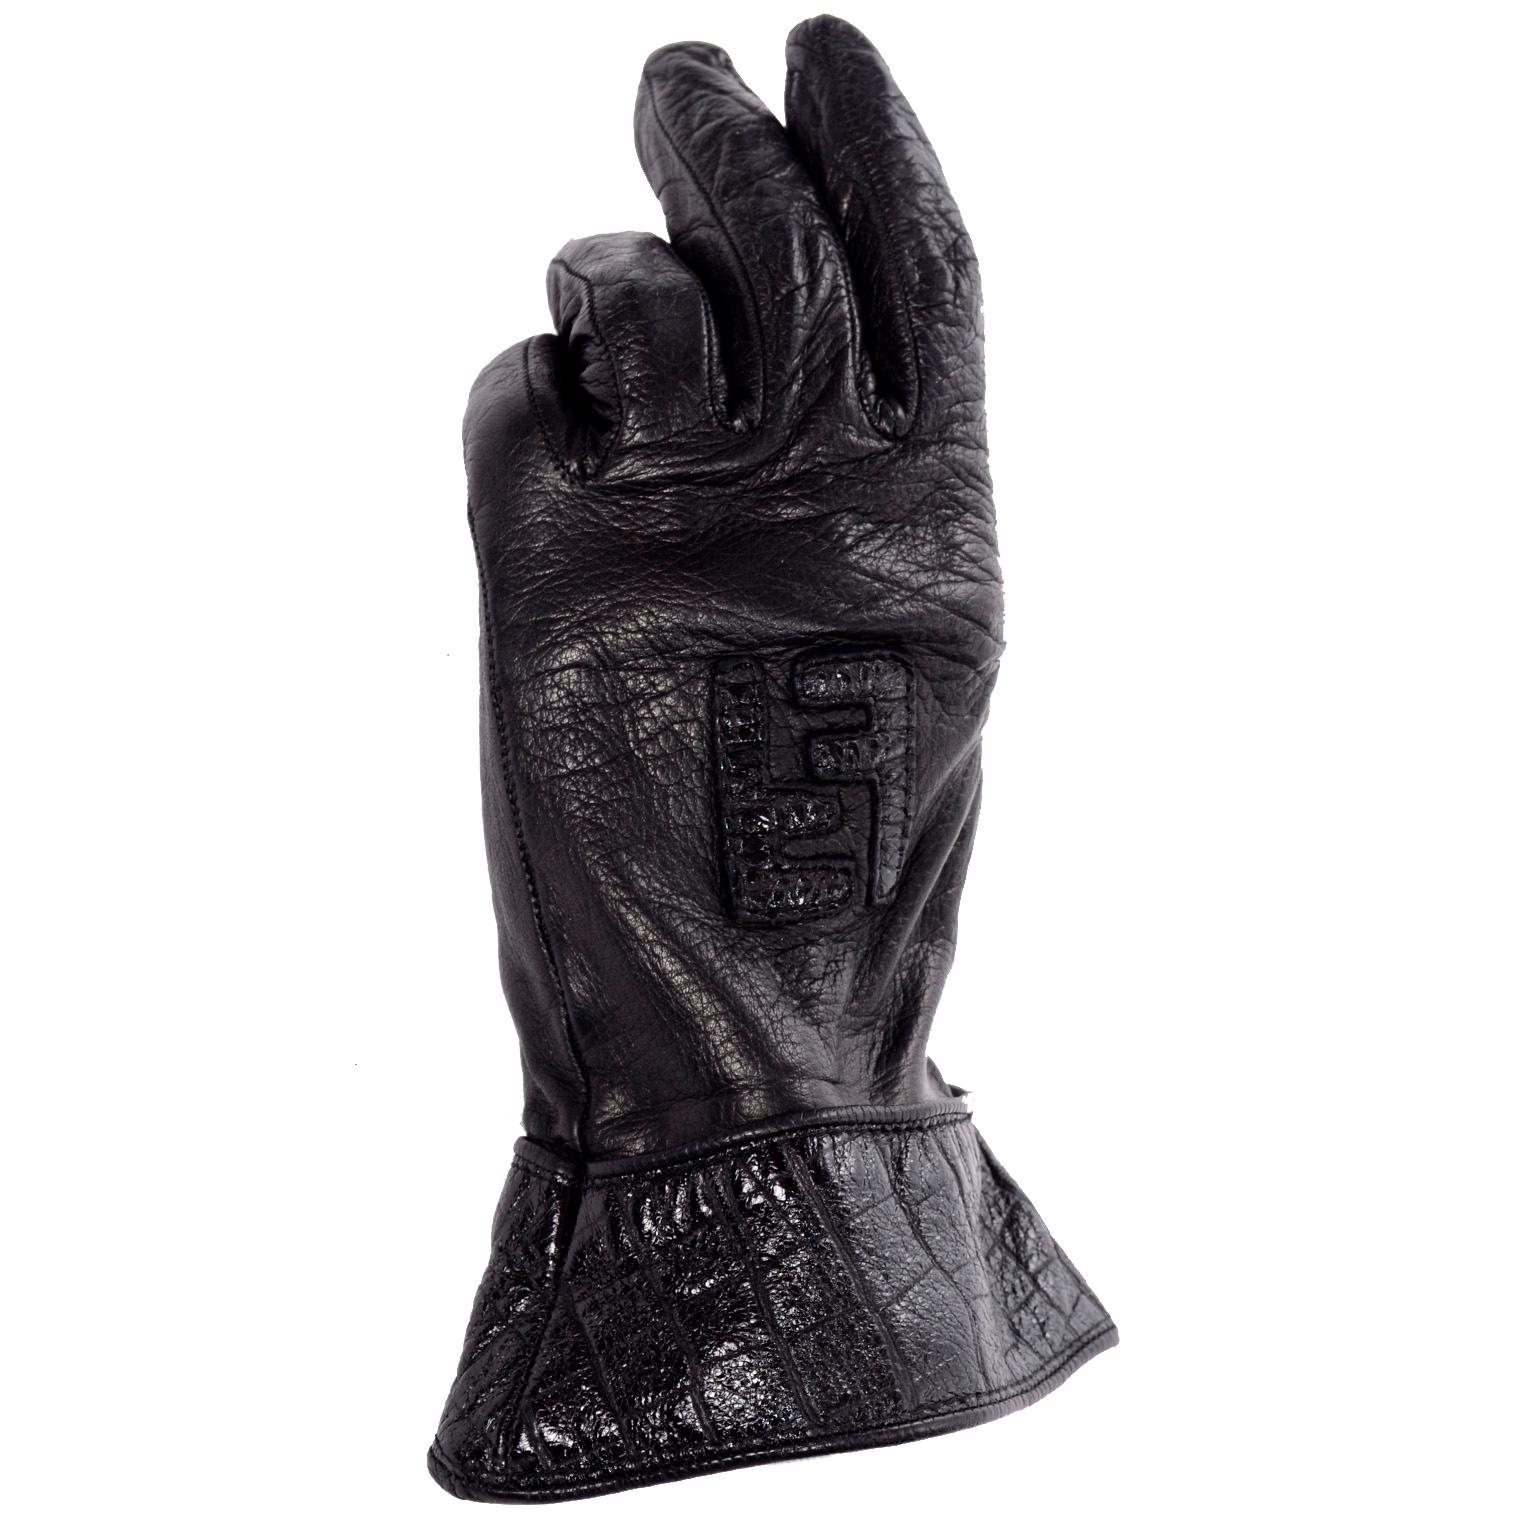 Vintage Black Leather Fendi Monogram crocodile embossed gloves lined in silk. The gloves have a modified gauntlet style and are so soft and comfortable!
Middle FInger to wrist: 7